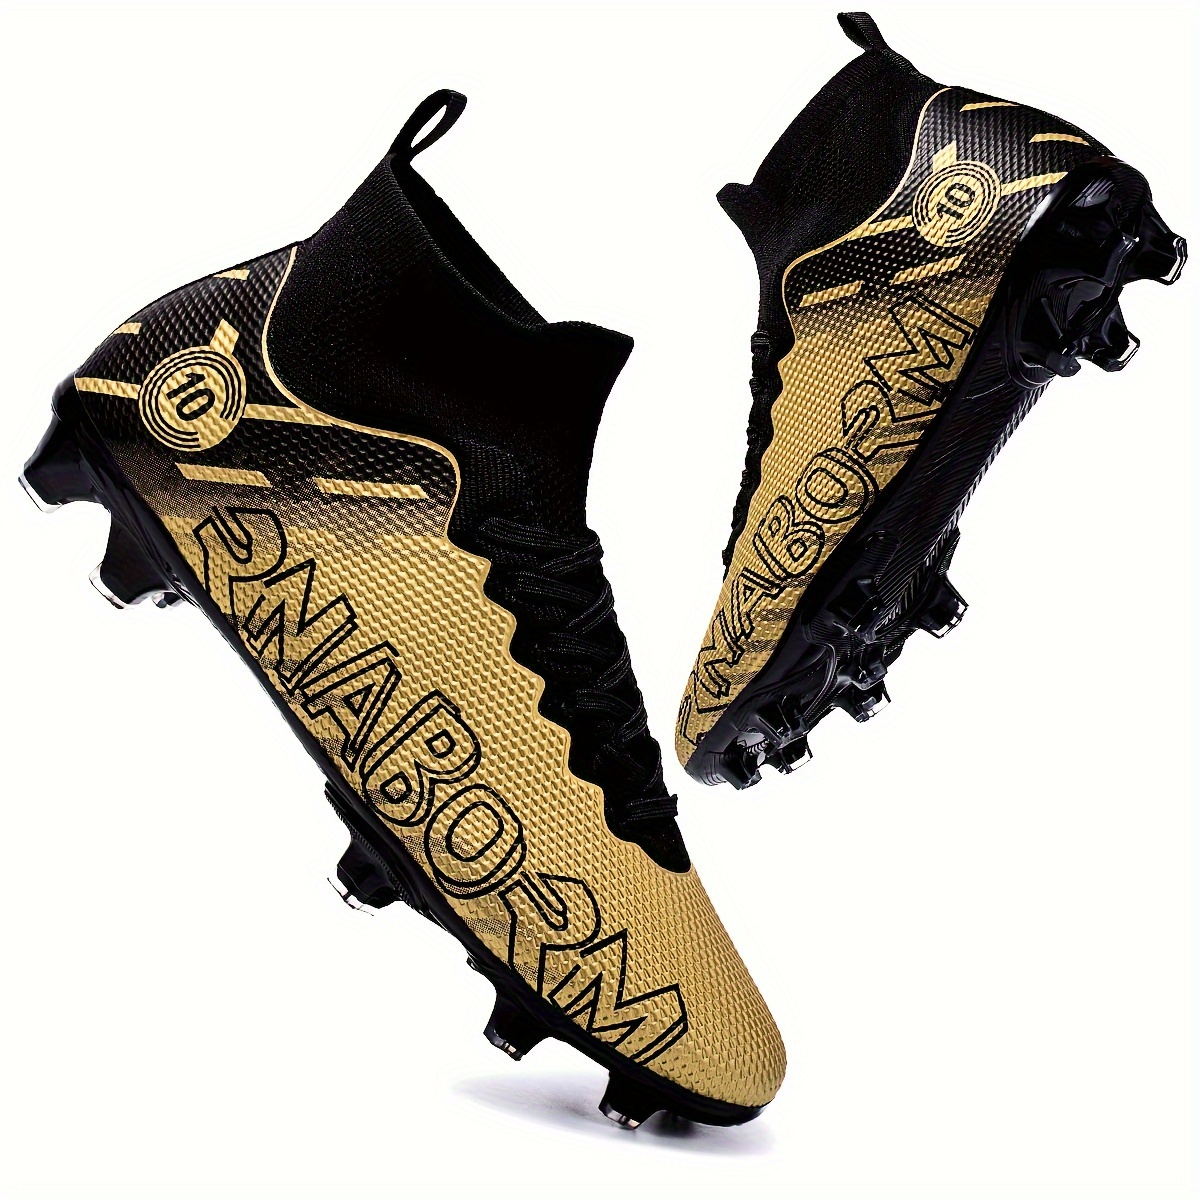 

Men's High Top Fg Football Boots, Professional Outdoor Anti-skid Breathable Lace Up Fg Soccer Cleats